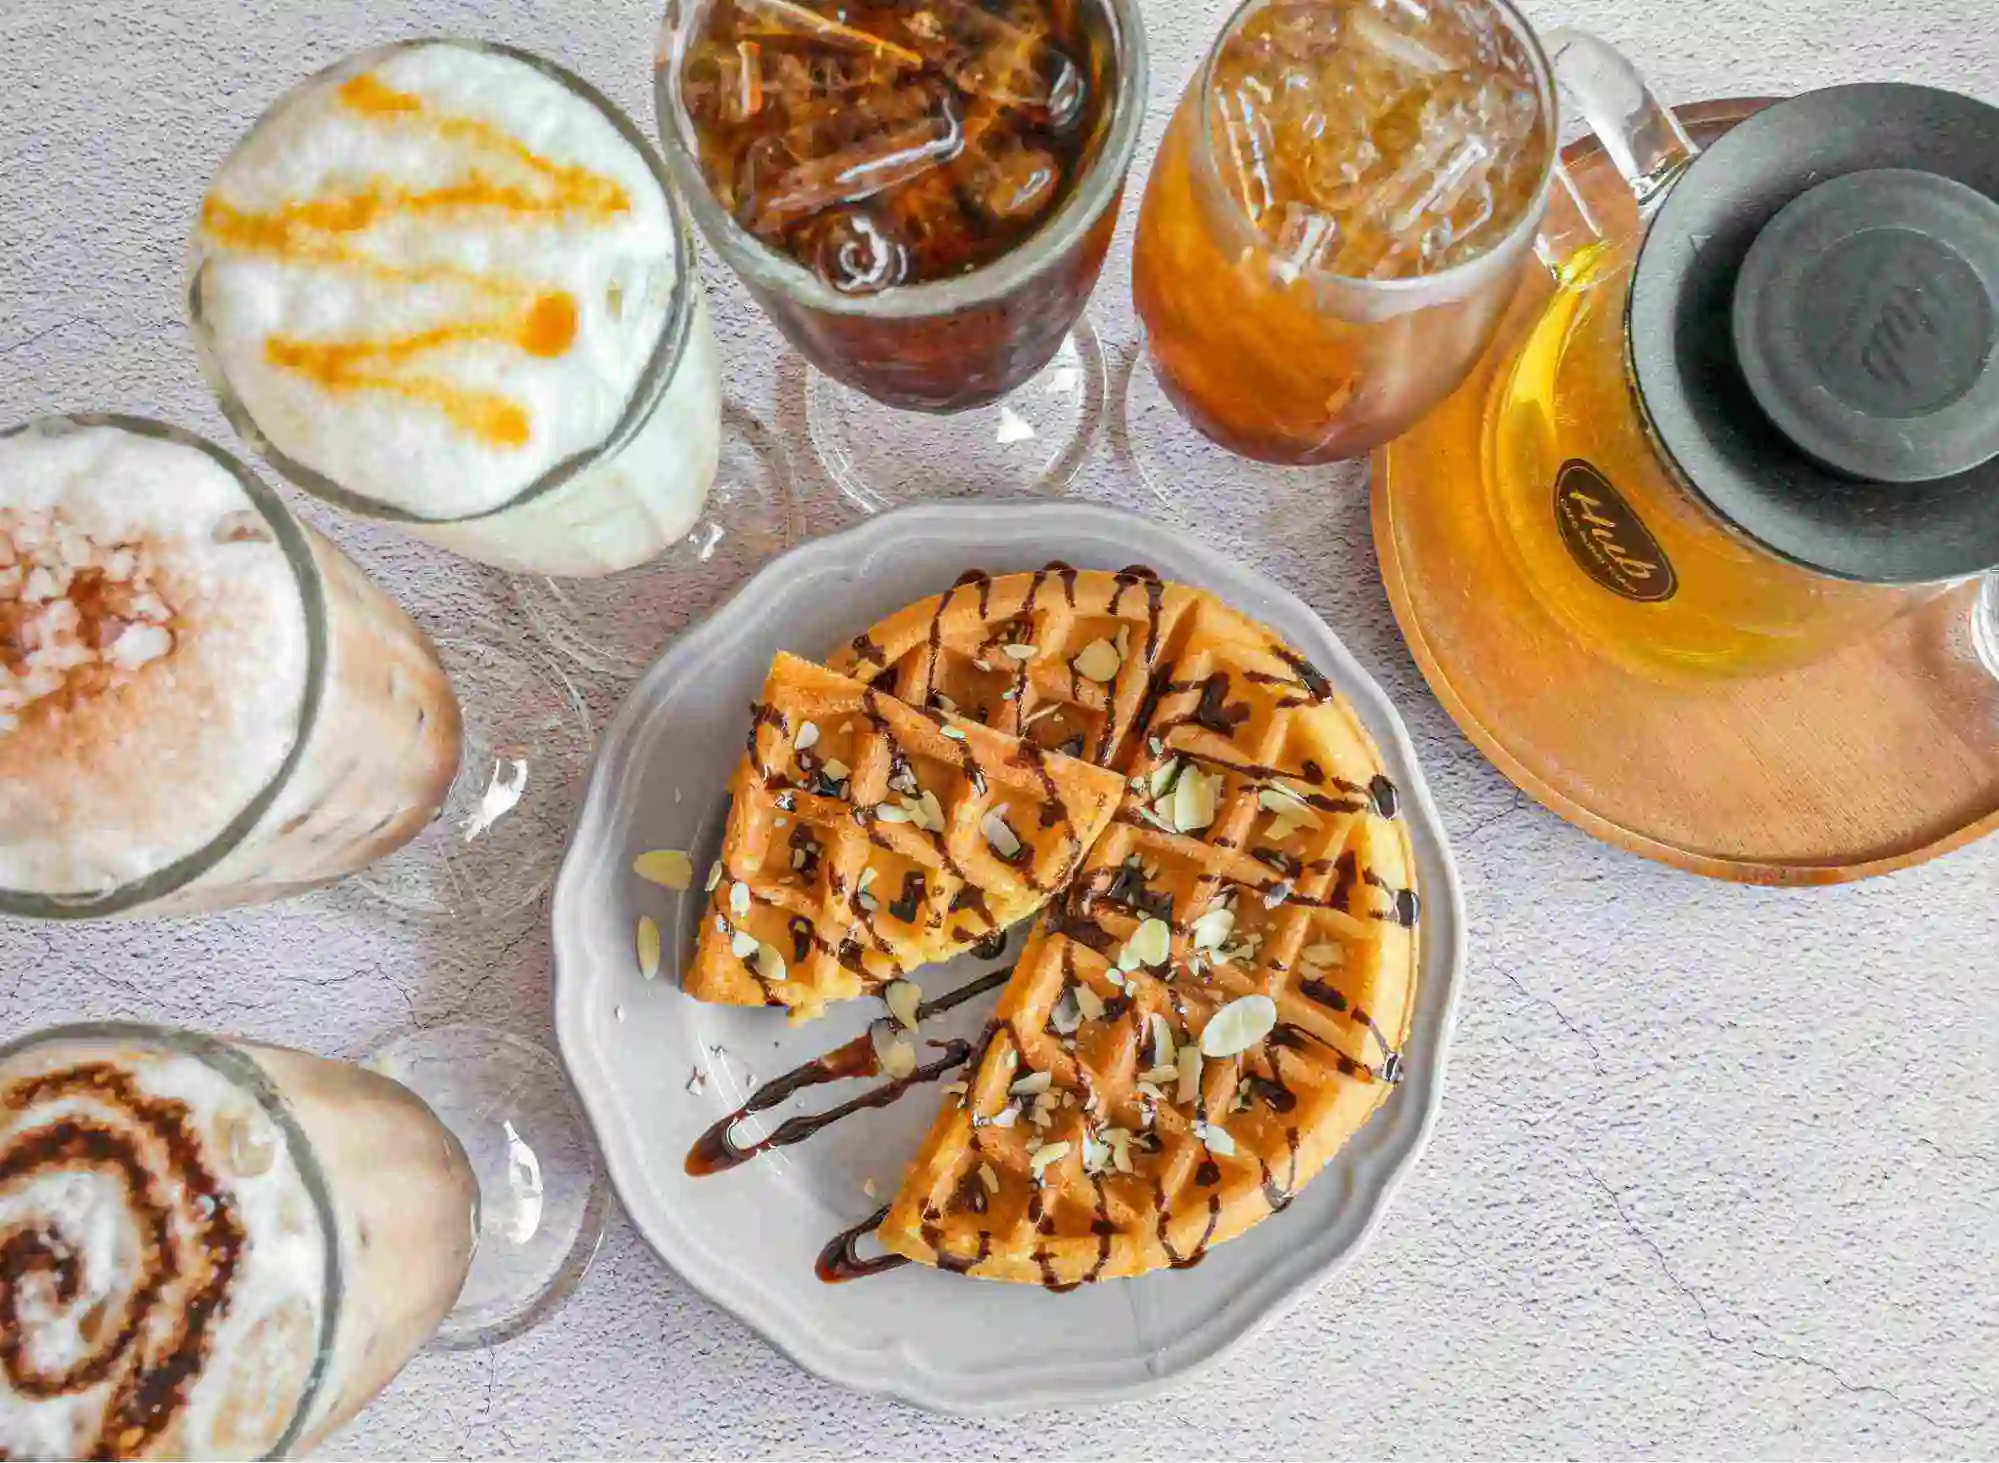 An overhead view of the drinks and waffles served at Hub Cafe in Surat Thani
